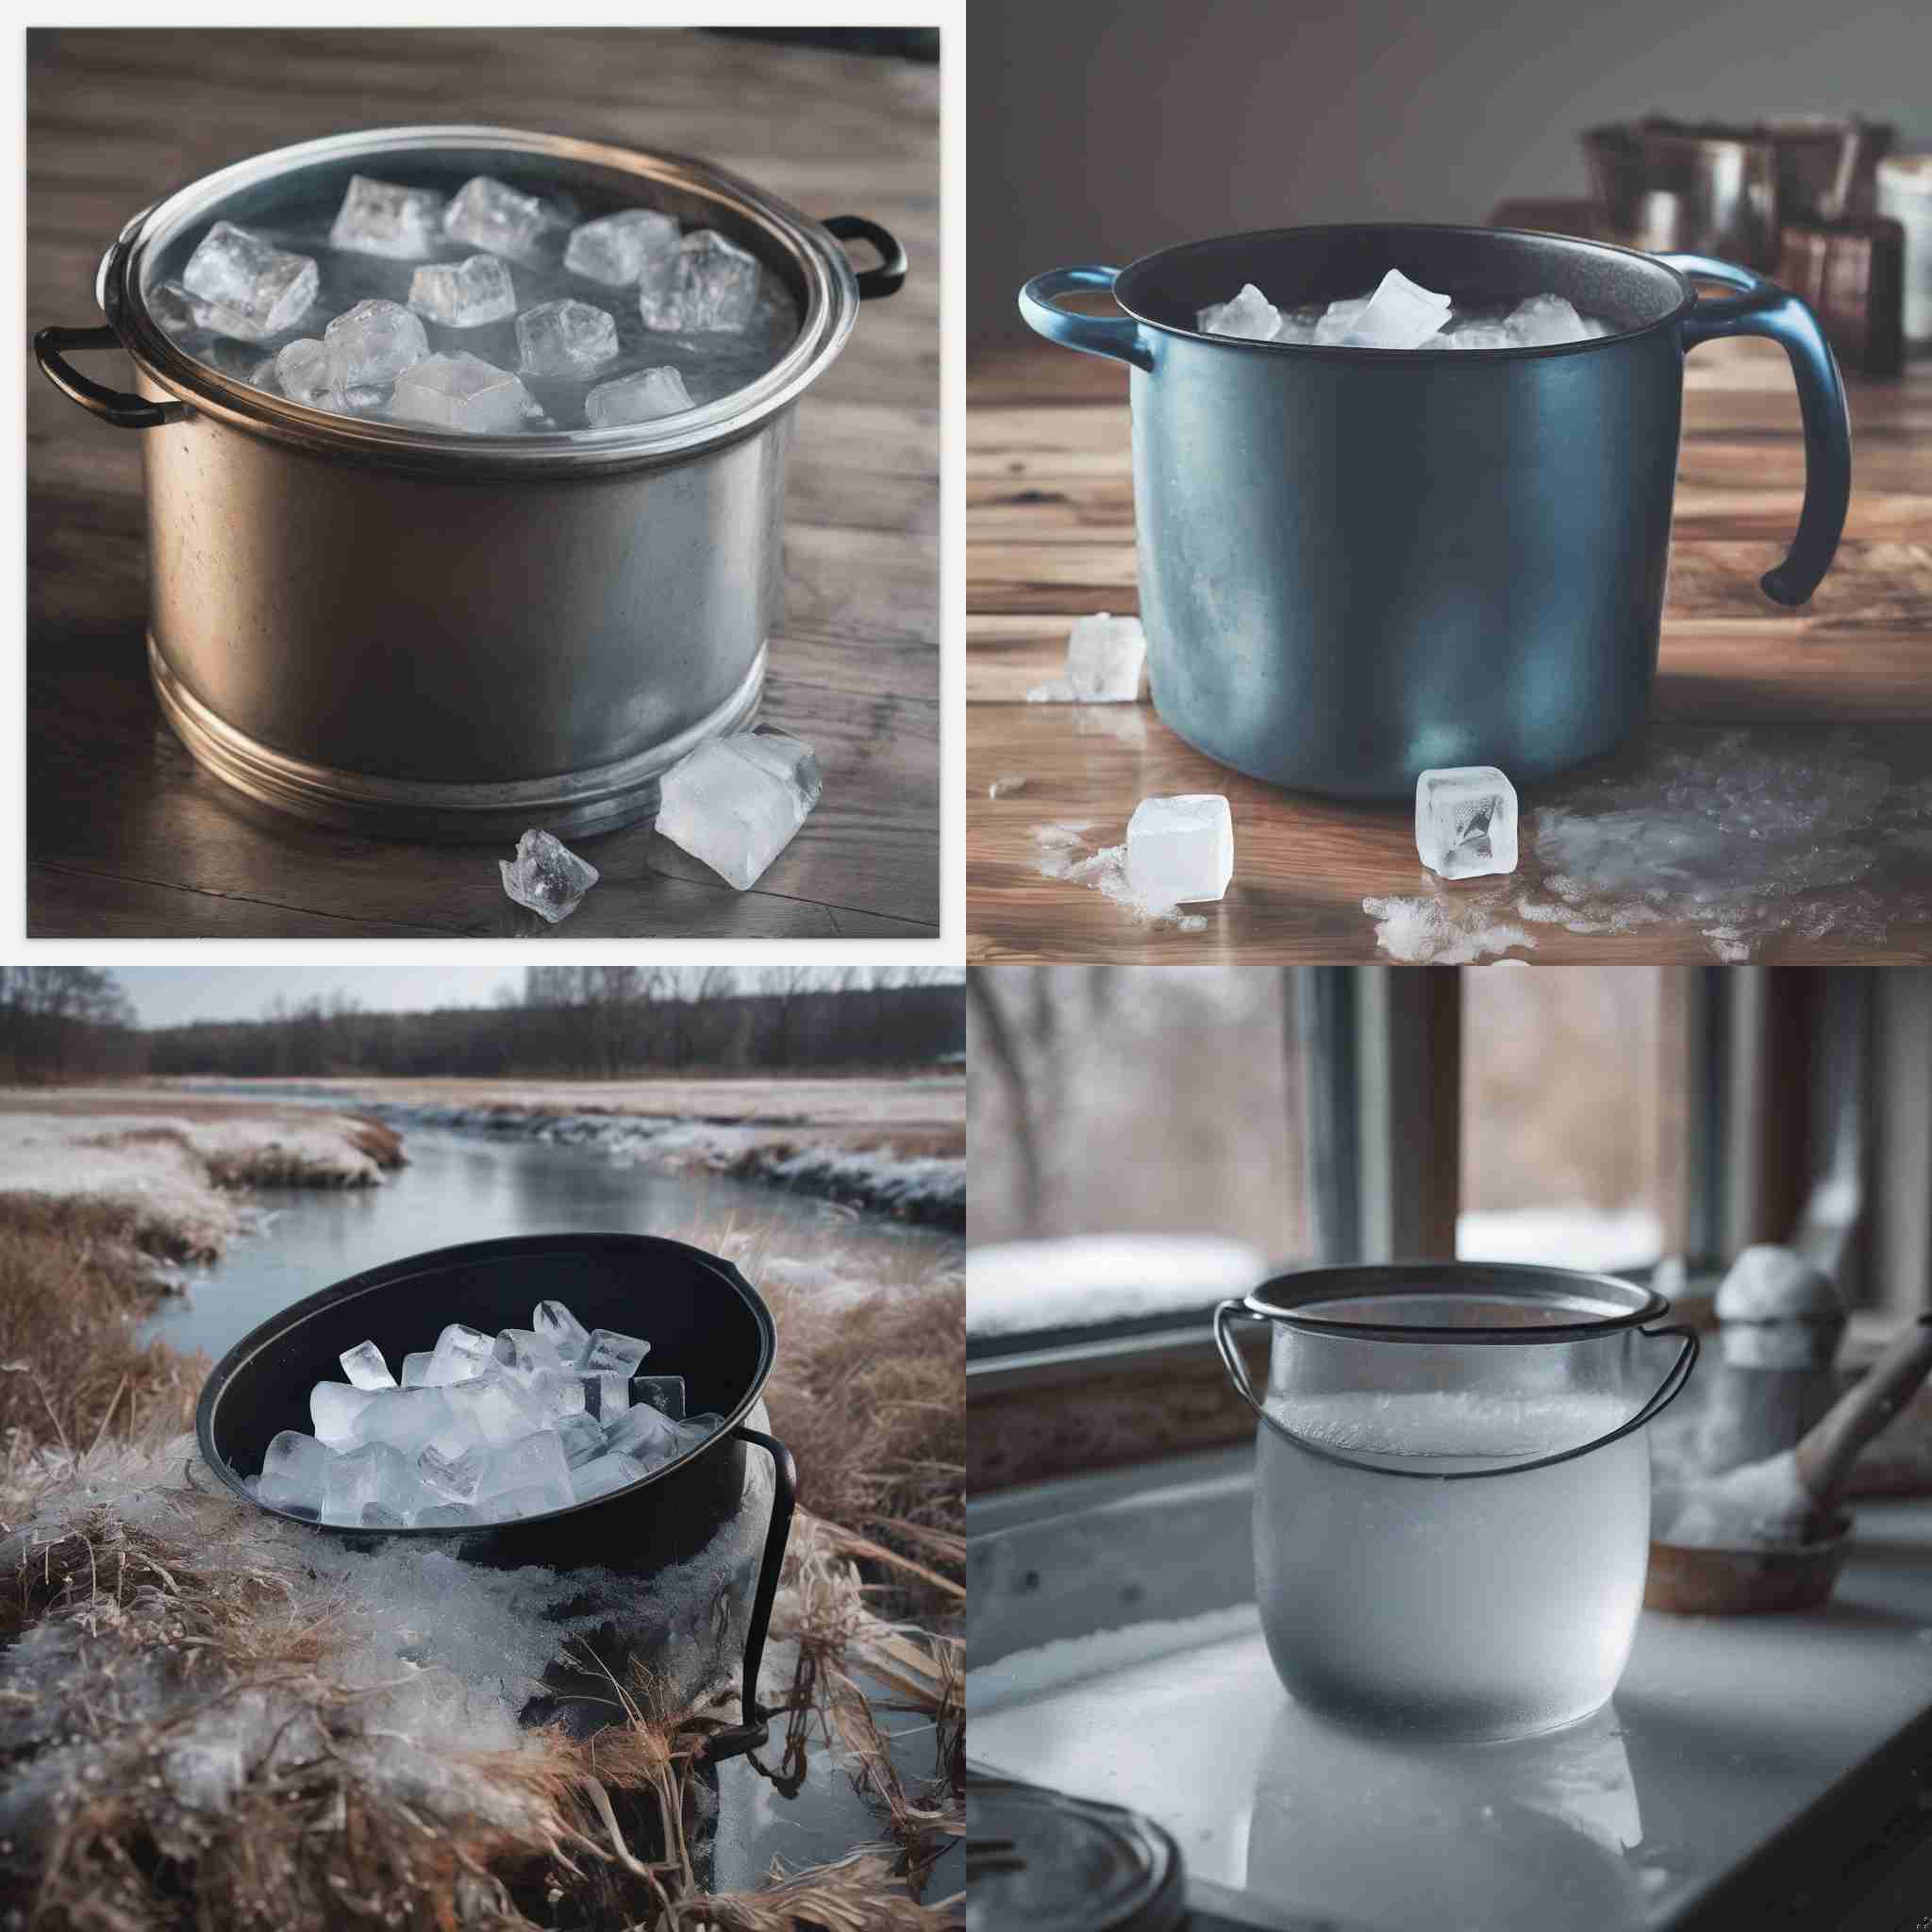 A pot of ice water on a cold day